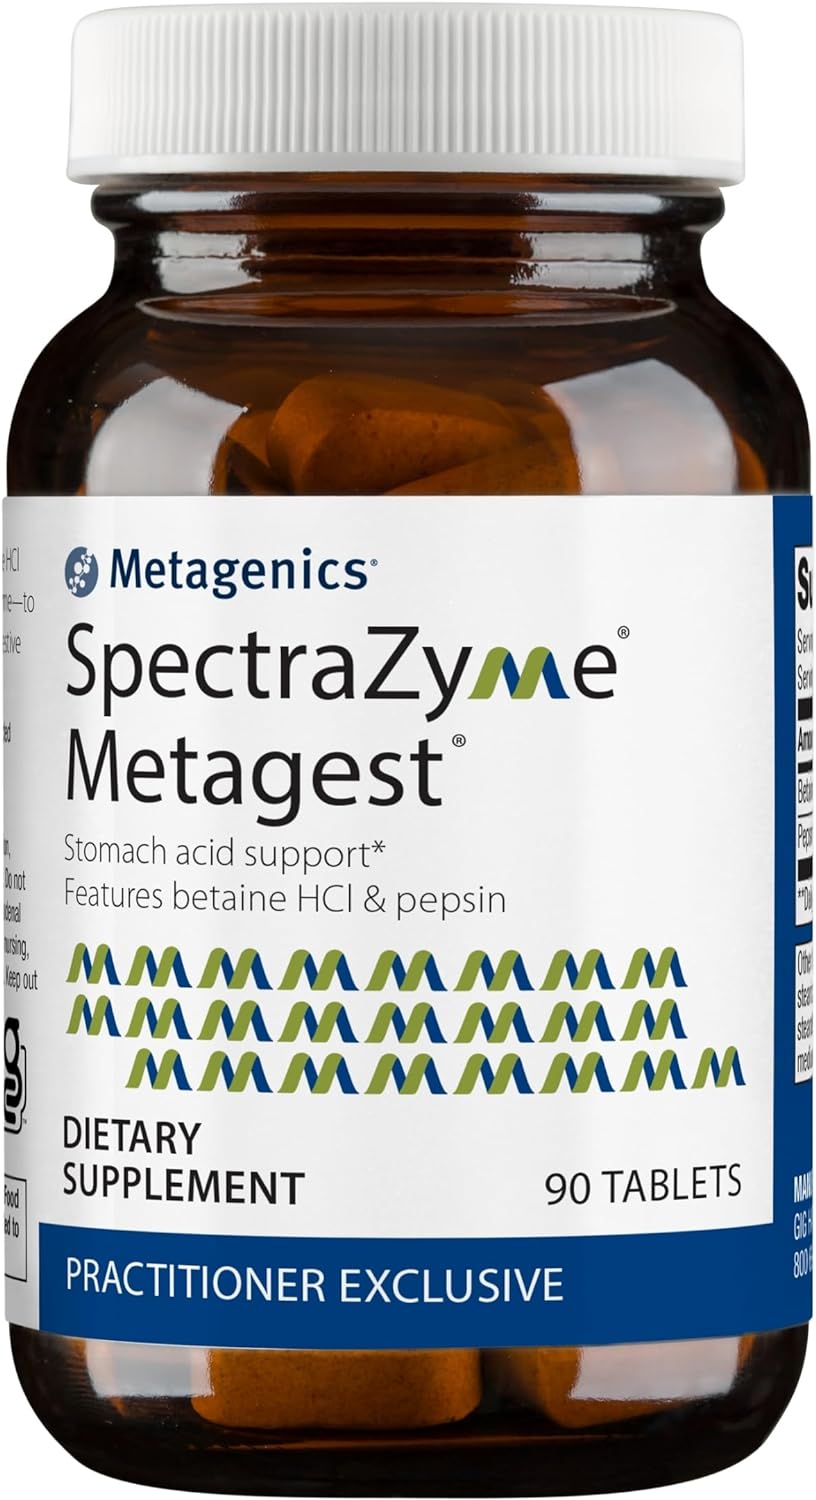 Metagenics SpectraZyme Metagest - Supports Stomach Health & Aids in Digestion* - with Betaine HCl & Pepsin - Proteolytic Digestive Enzyme* - Non-GMO - 45 Servings - 90 Tablets